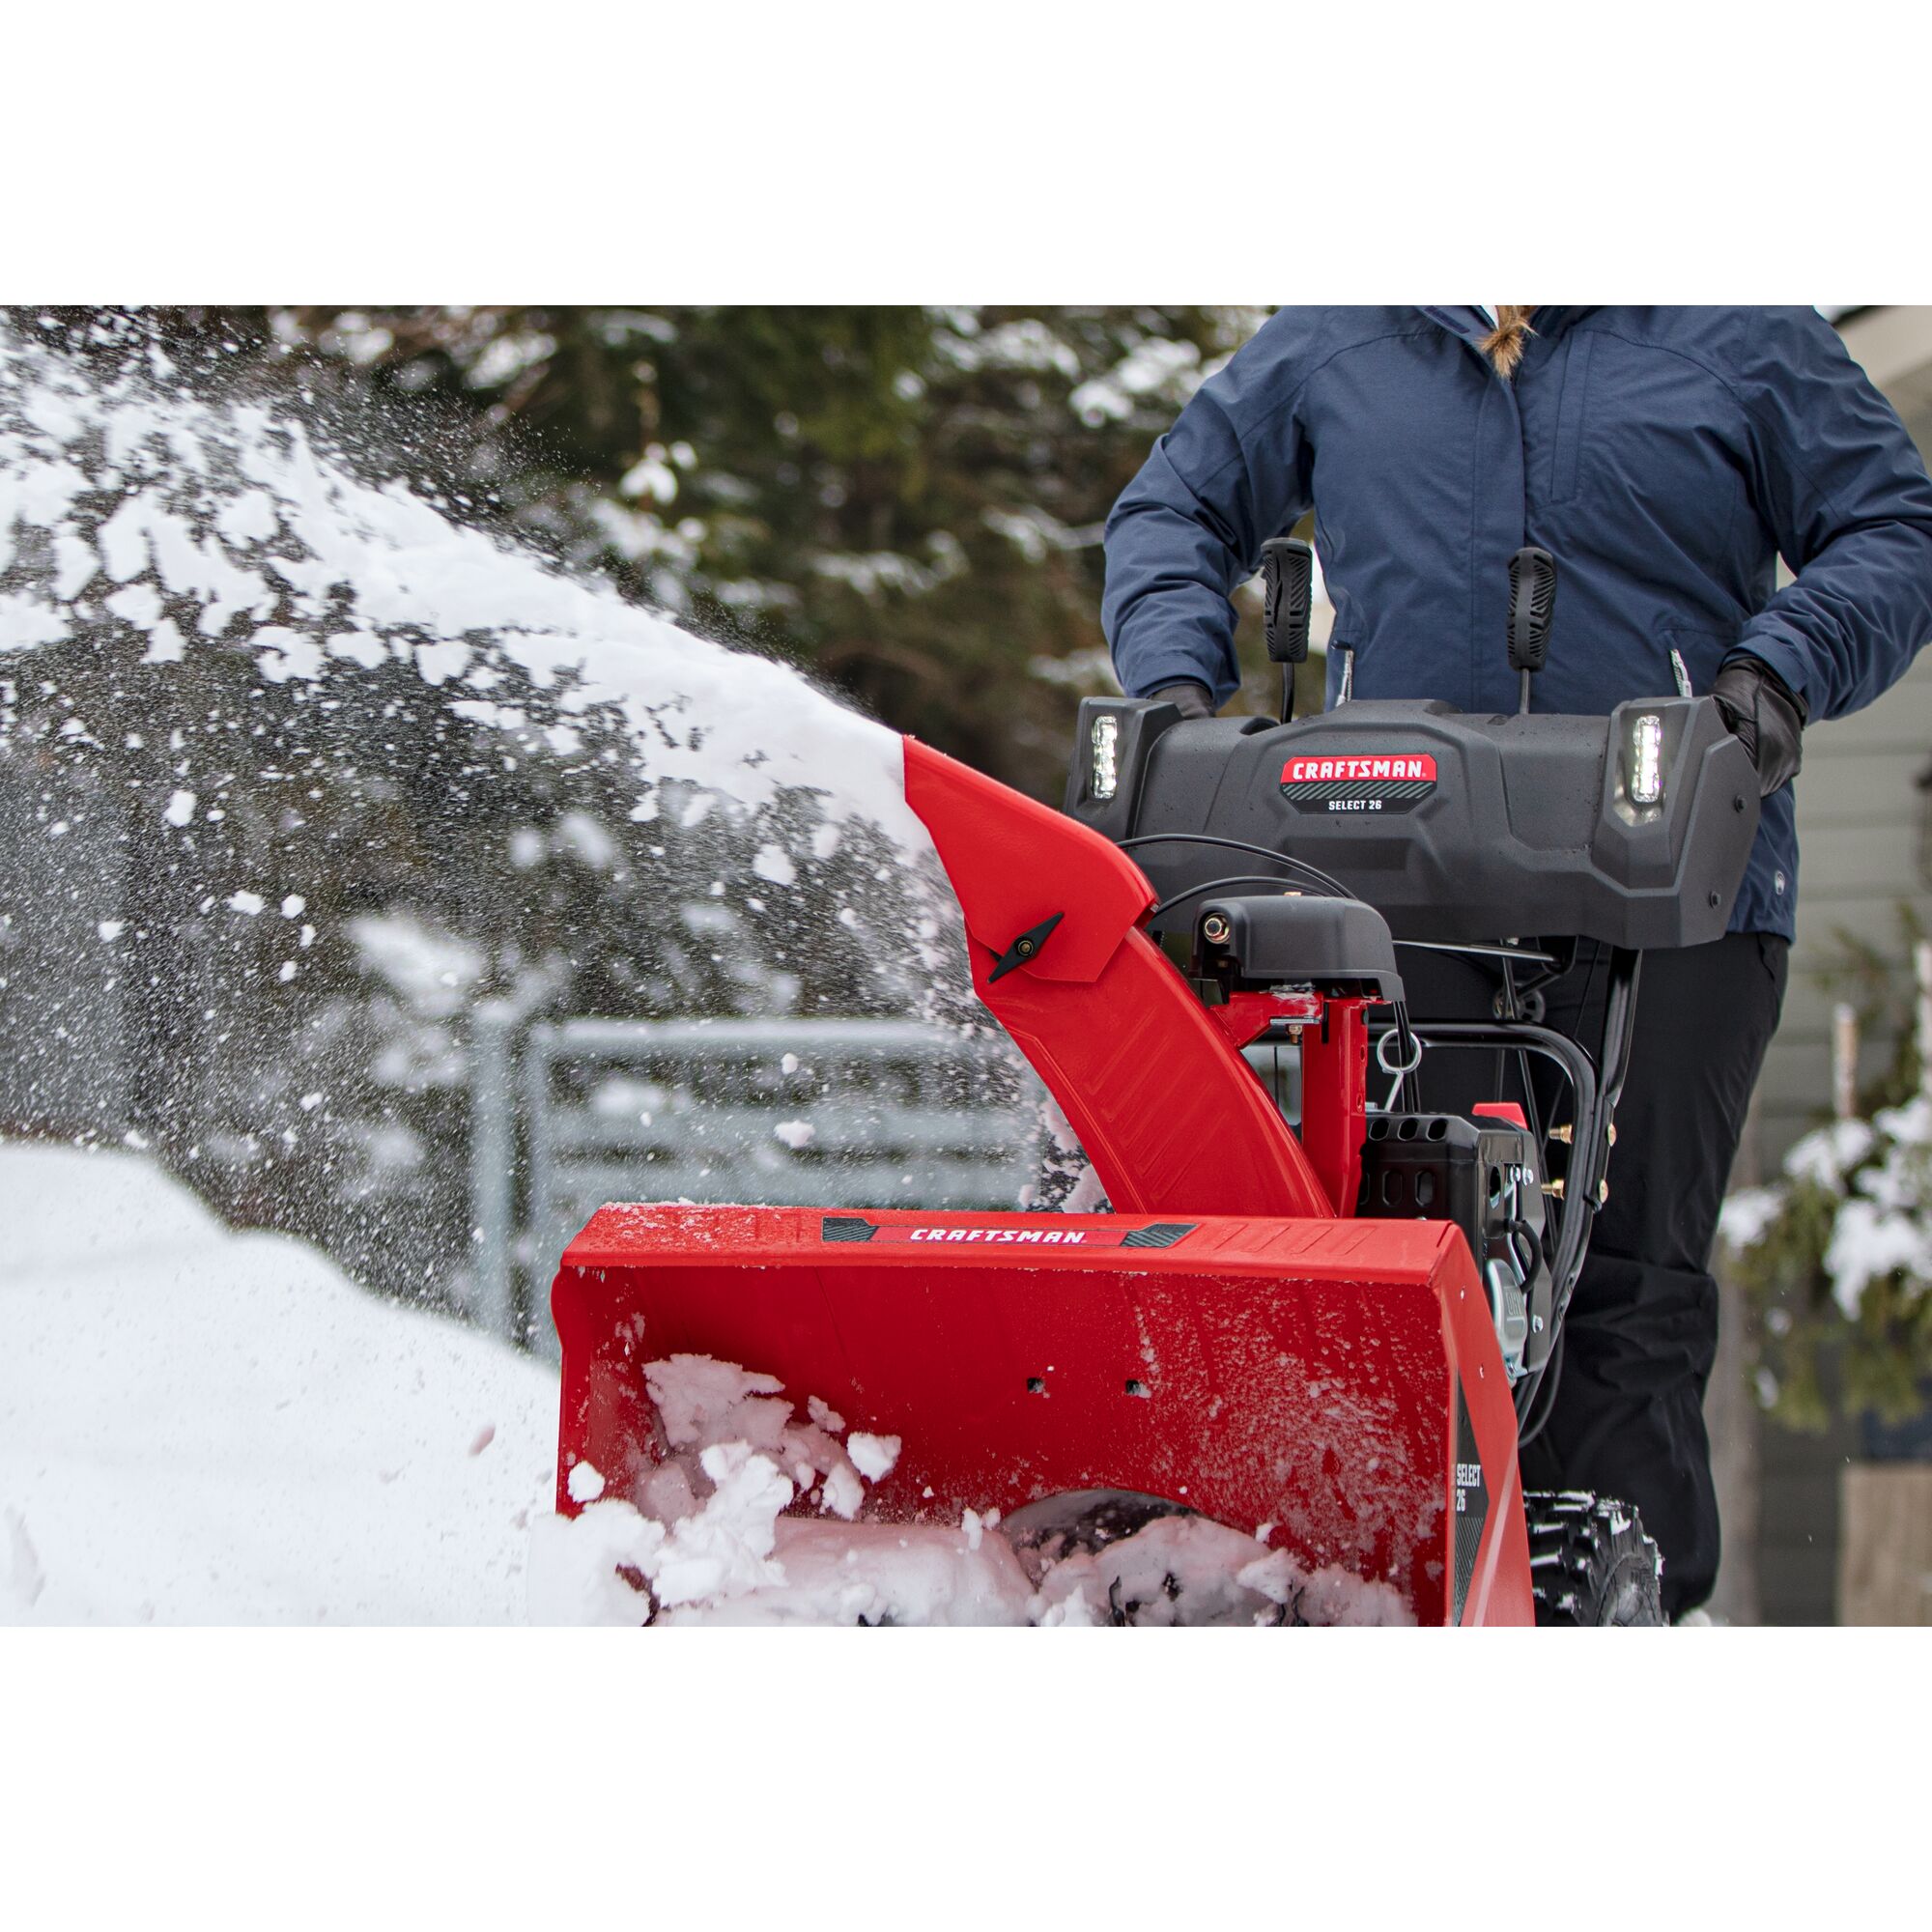 CRAFTSMAN Select 26 Snowblower clearing snow focused on snow coming out of chute